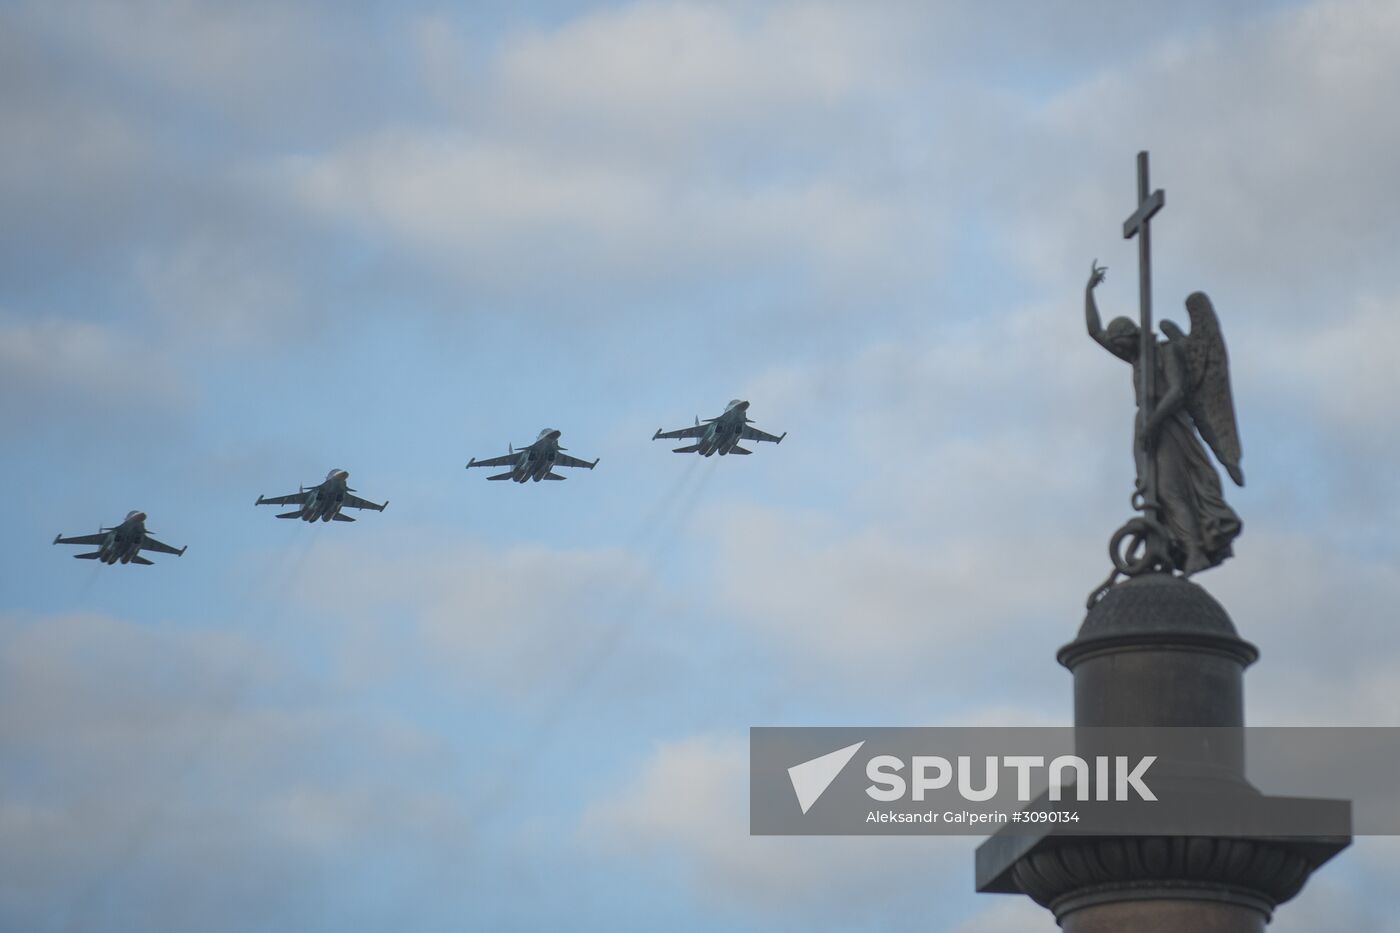 Military aircraft during Victory Day parade rehearsal in St. Petersburg